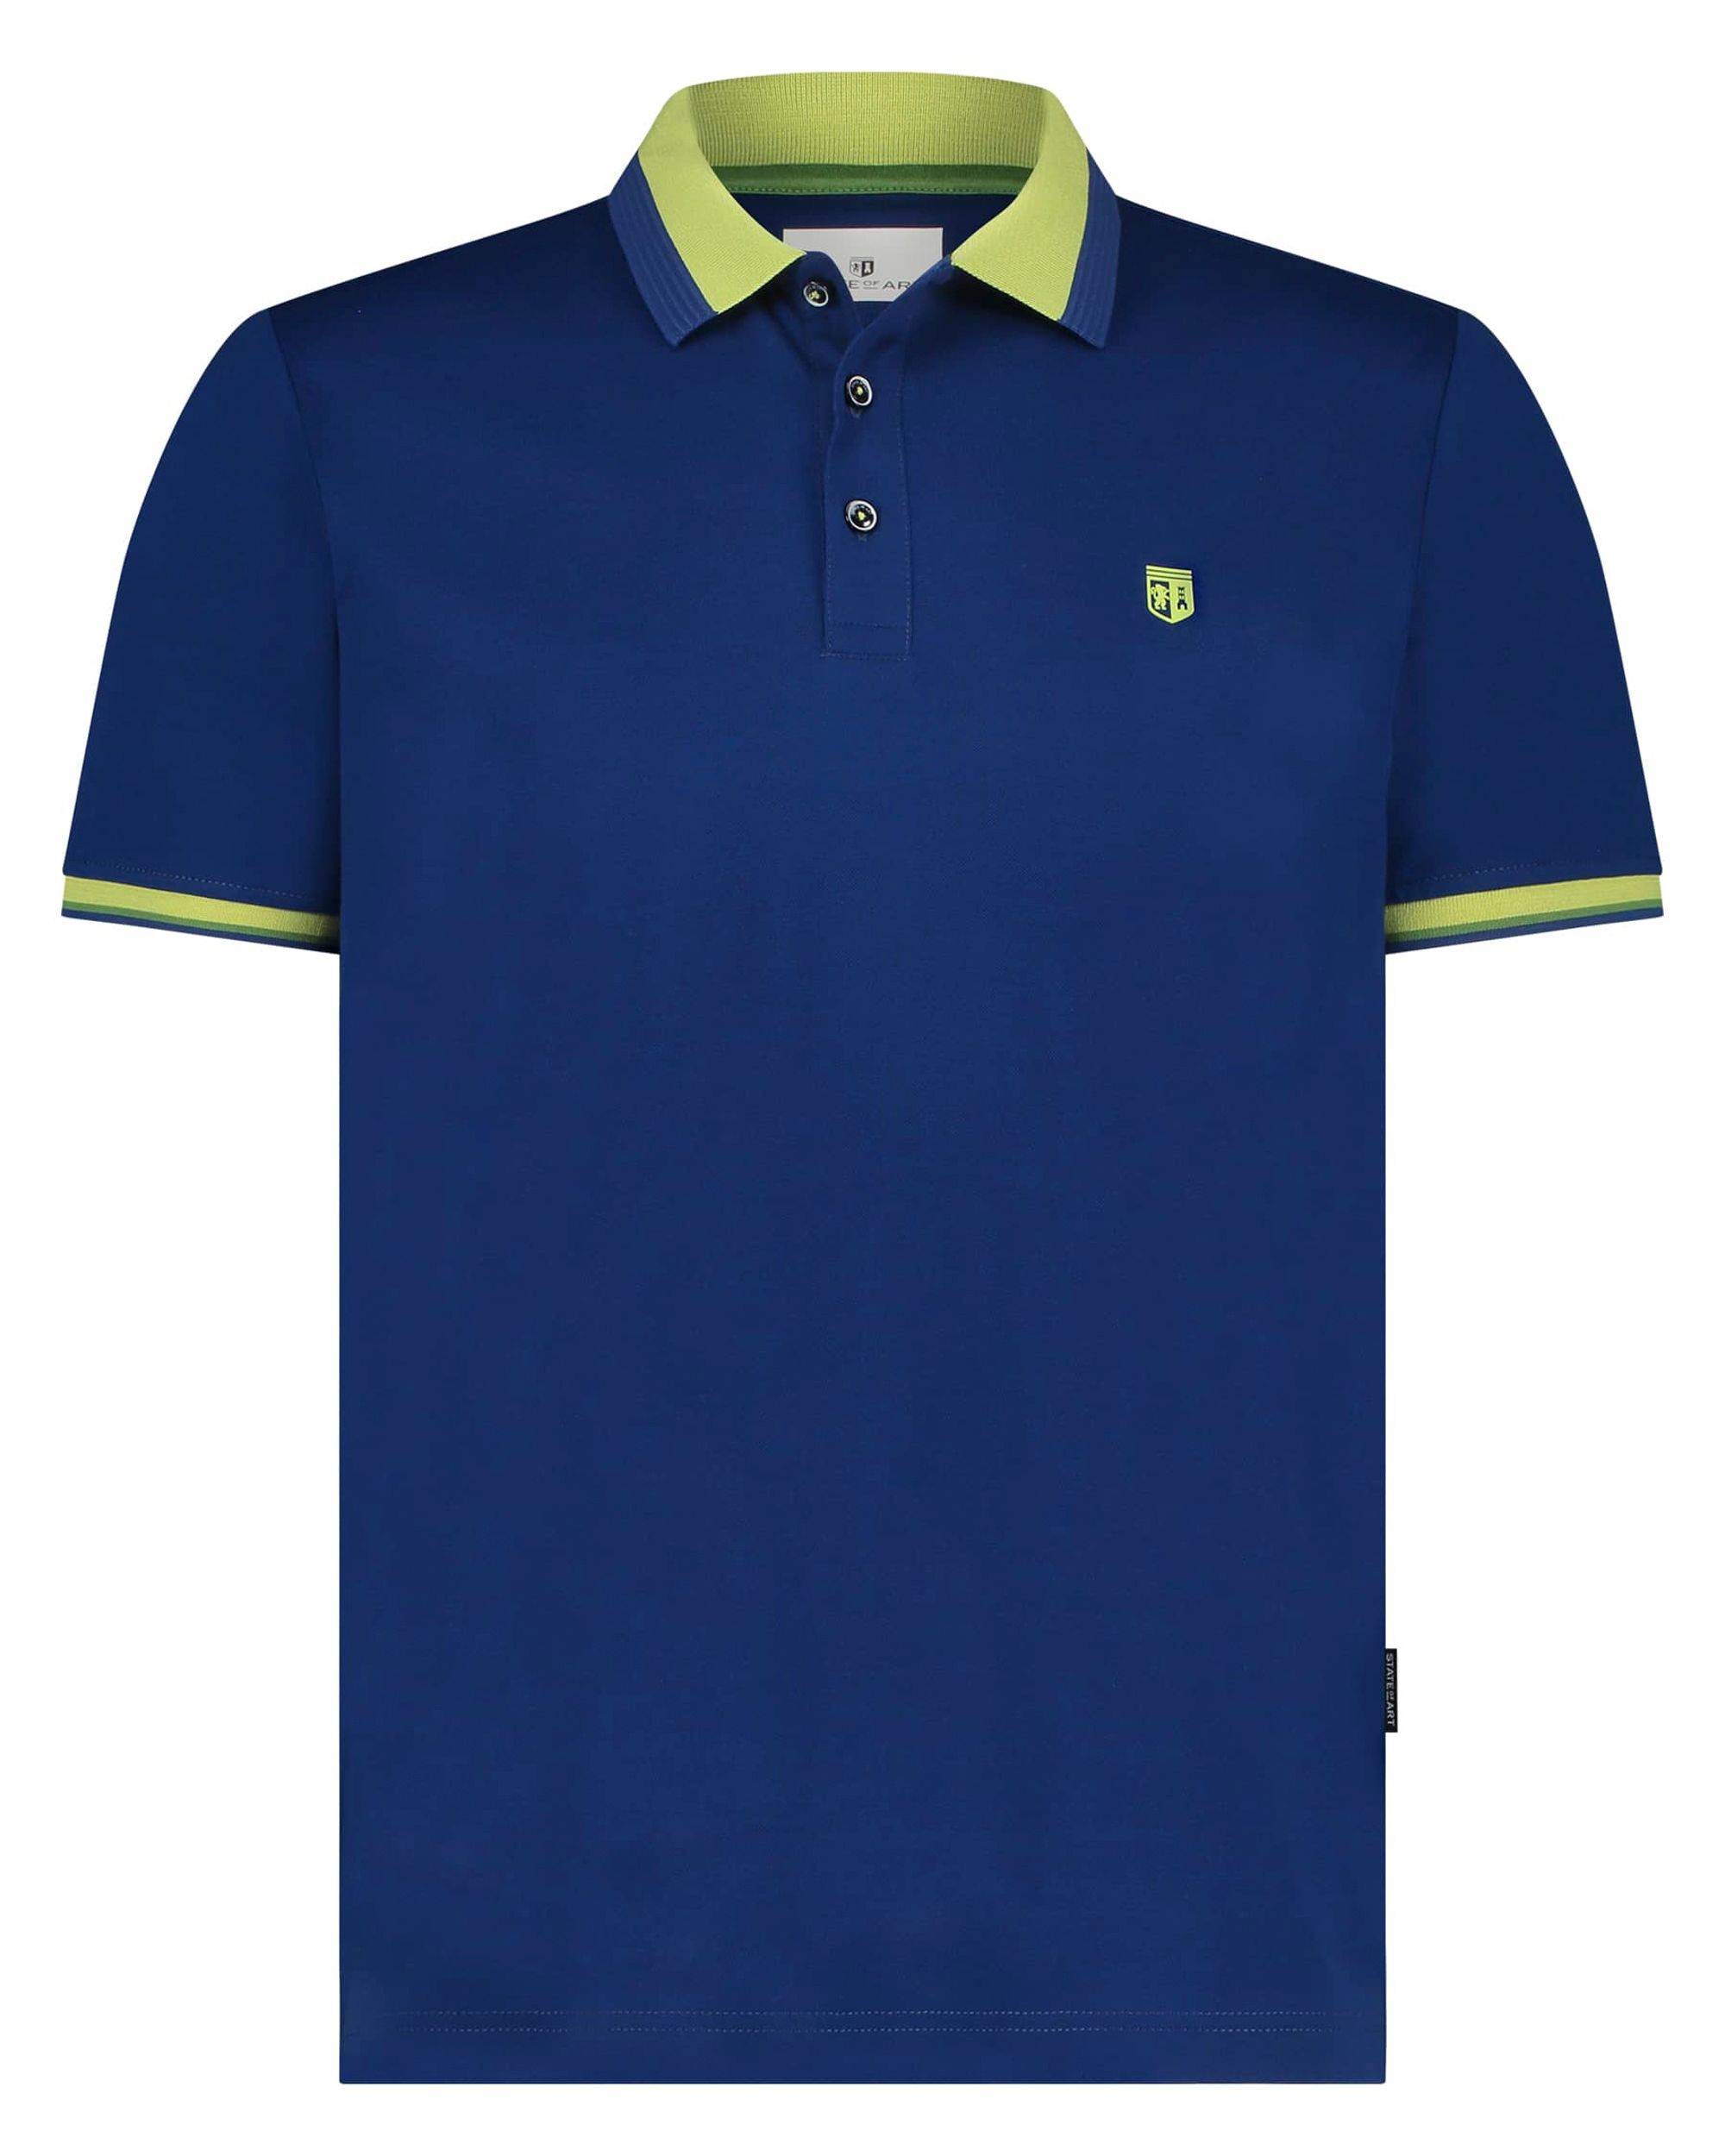 State of Art Polo KM Donker blauw 093421-001-4XL